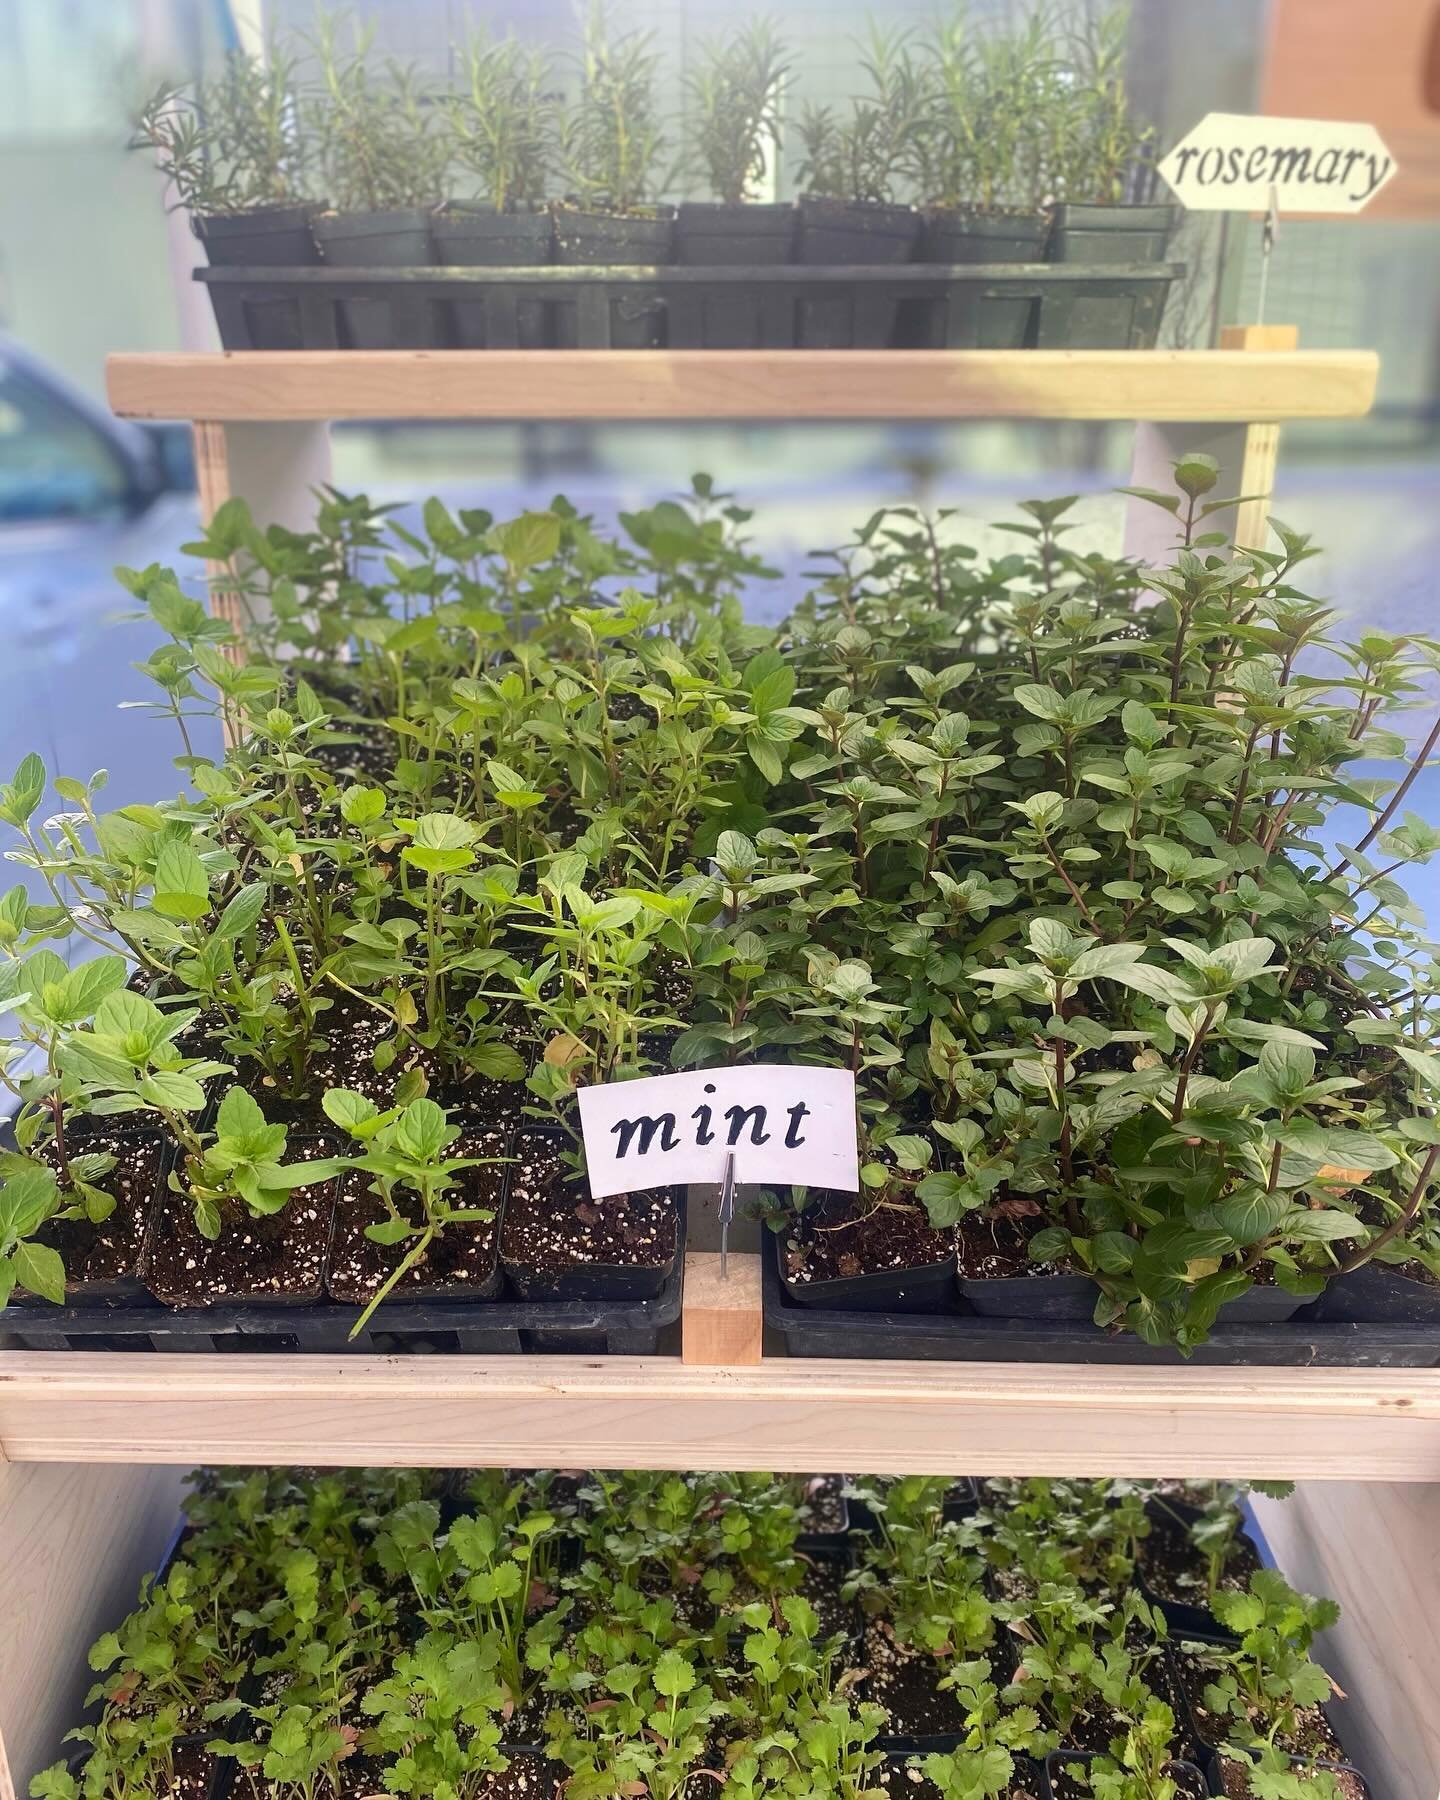 Brand new seedlings for your home herb garden and preserves for anytime! Swipe to see our new labels➡️

It&rsquo;s a beautiful day here at the market, so come check out the early offerings from the patch 🌱🥗🥫
.
.
.
#kelowna #kelownafarmersmarket #f